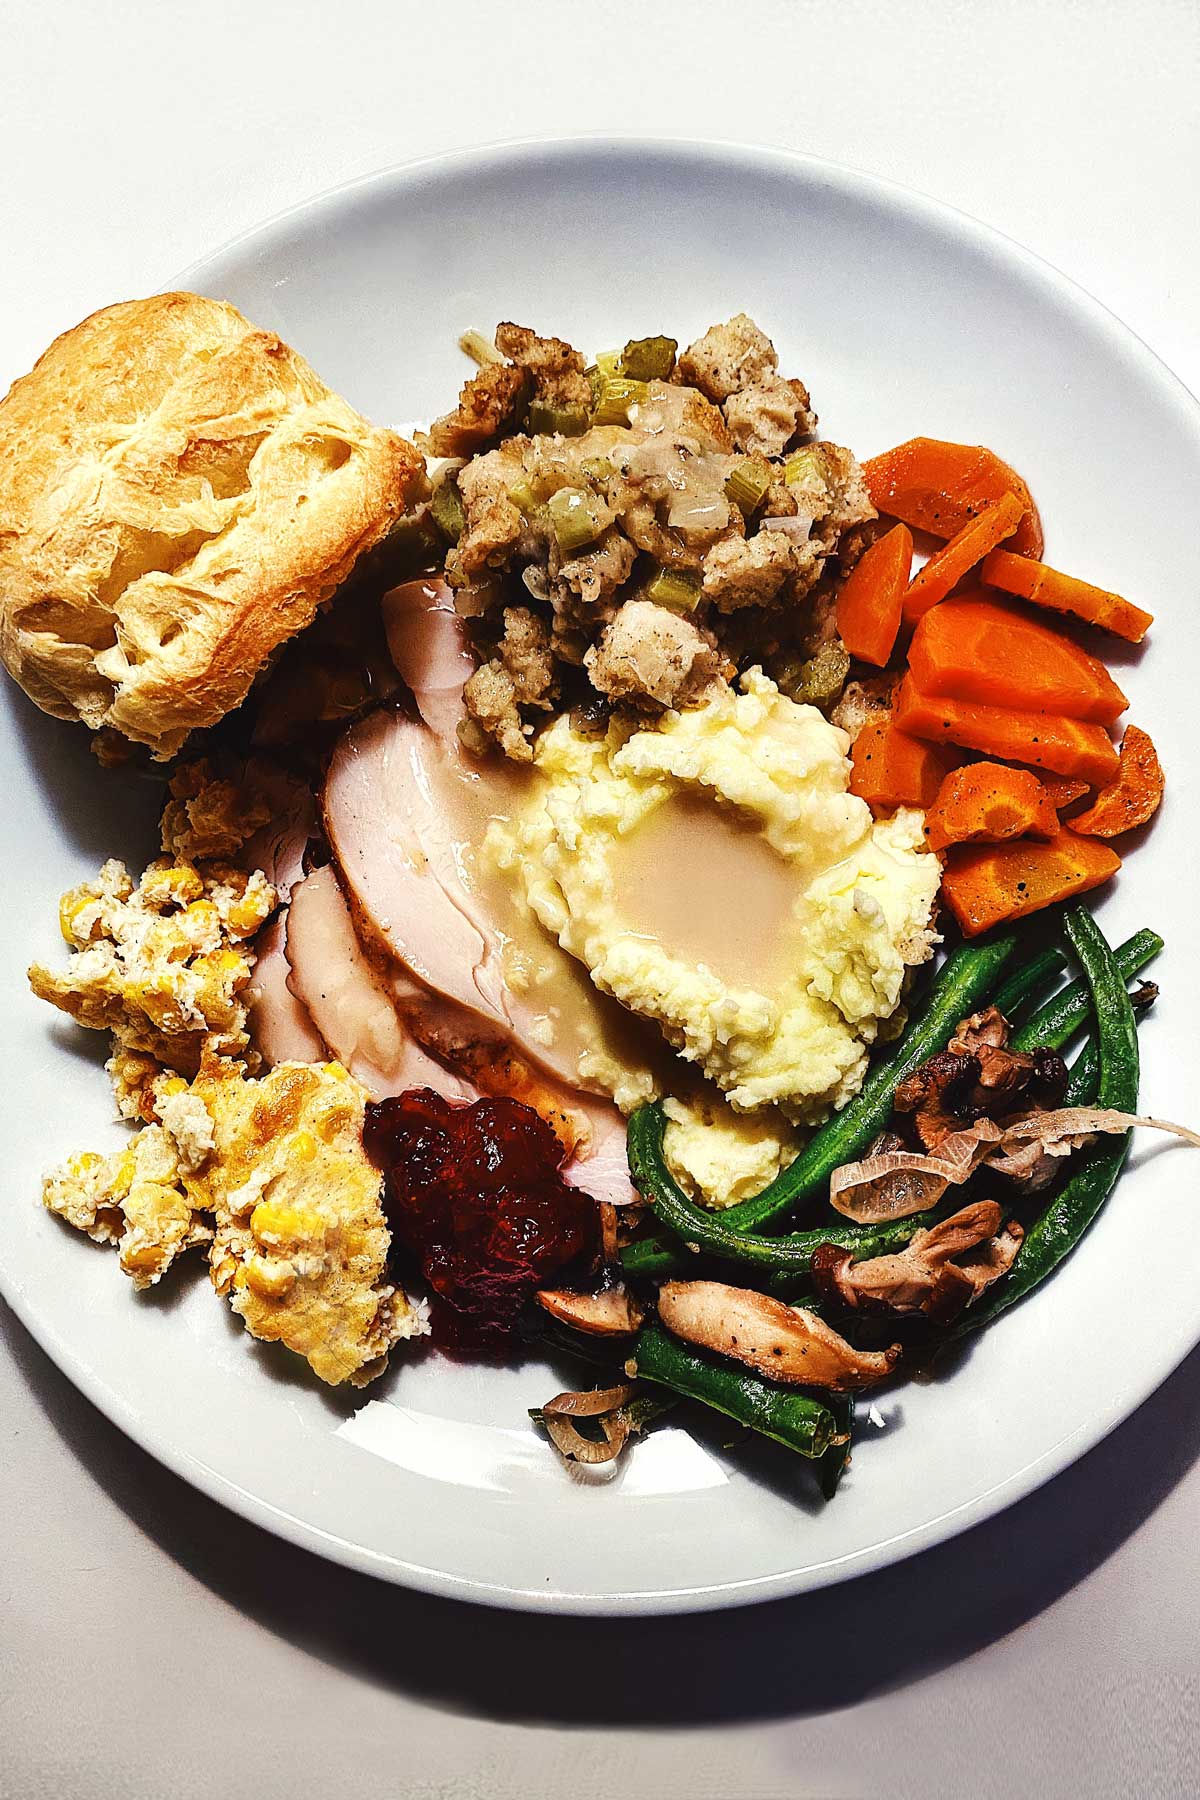 Thanksgiving dinner made from just 20 ingredients - The Washington Post